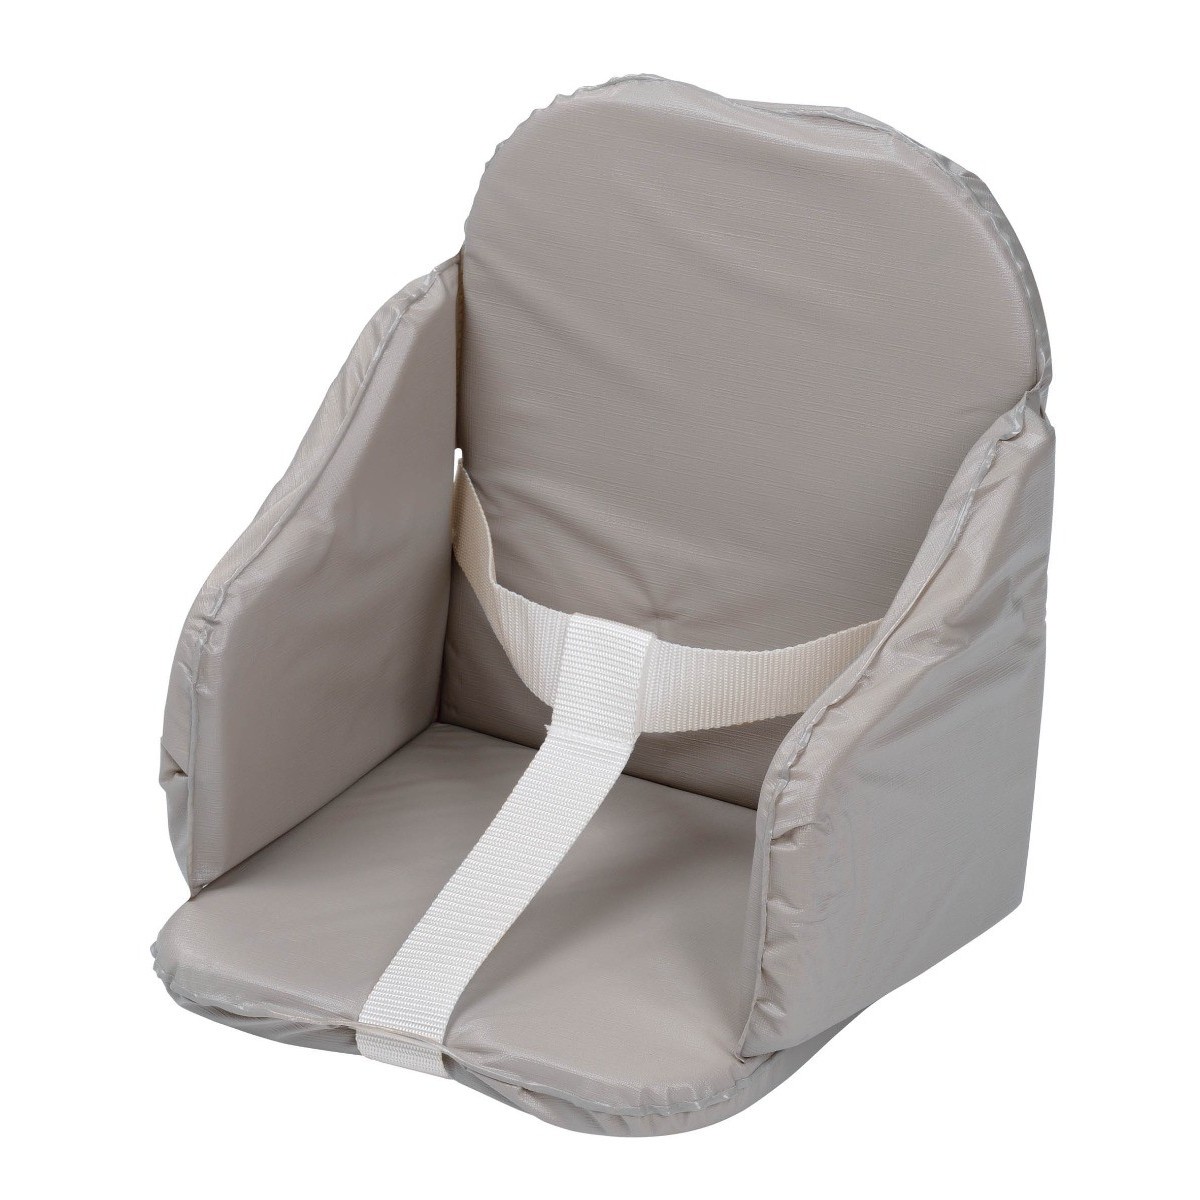 A Grey High Chair Cushion with security straps